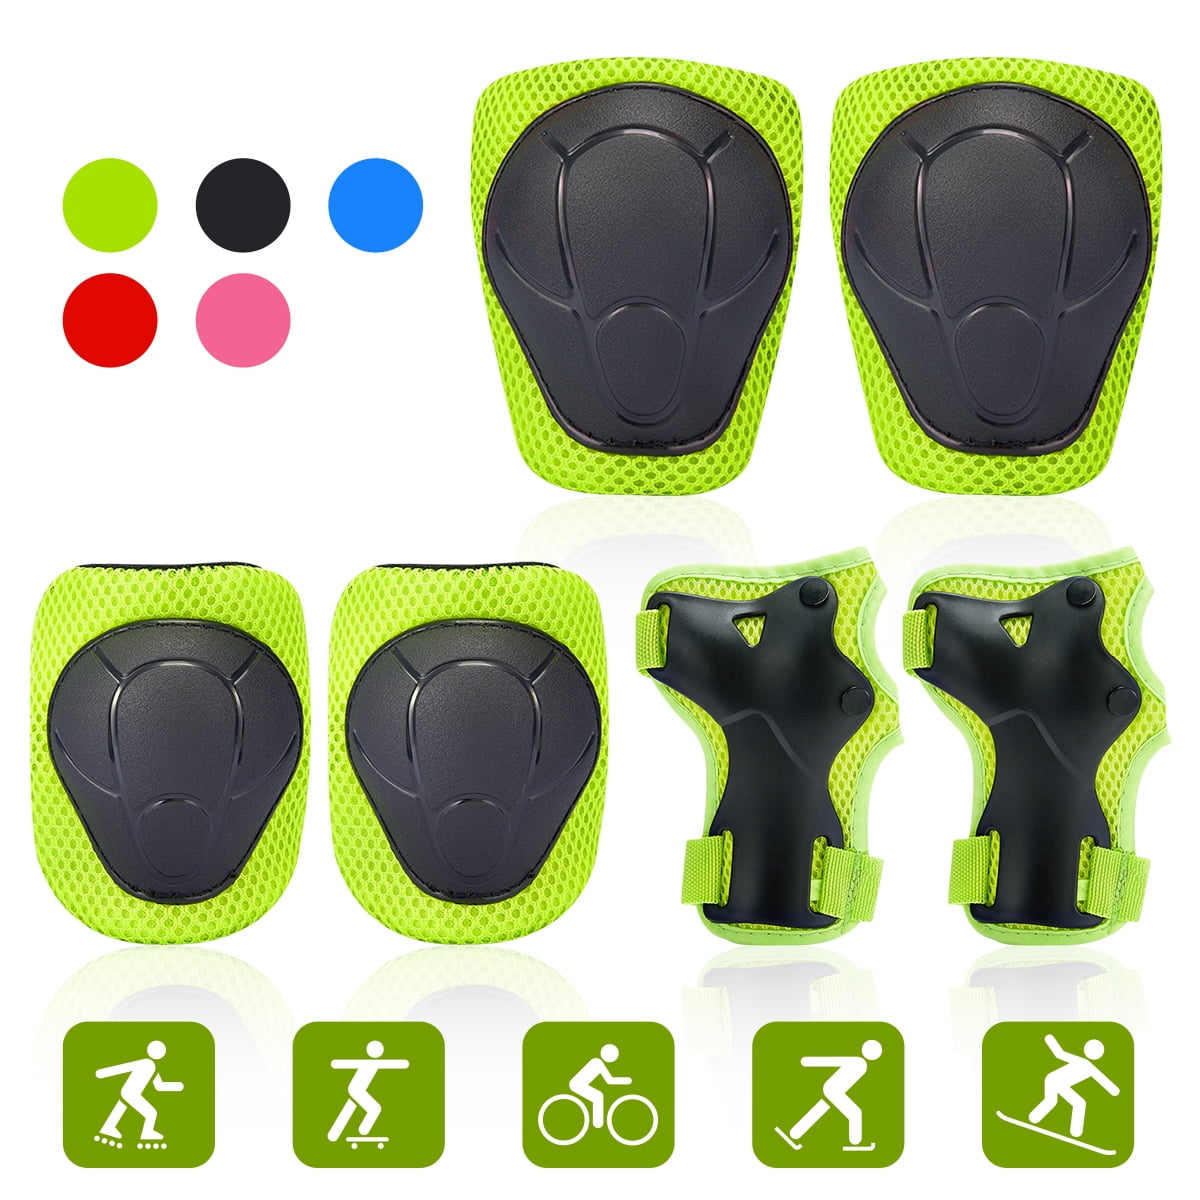 KOOVAGI Knee Pads for Kids Toddler Knee Pads and Elbow Pads Set with Wrist Guards 3 in 1,Children Protective Gear Set for Skating Riding Cycling Biking Rollerblading Scooter 3-8 Years